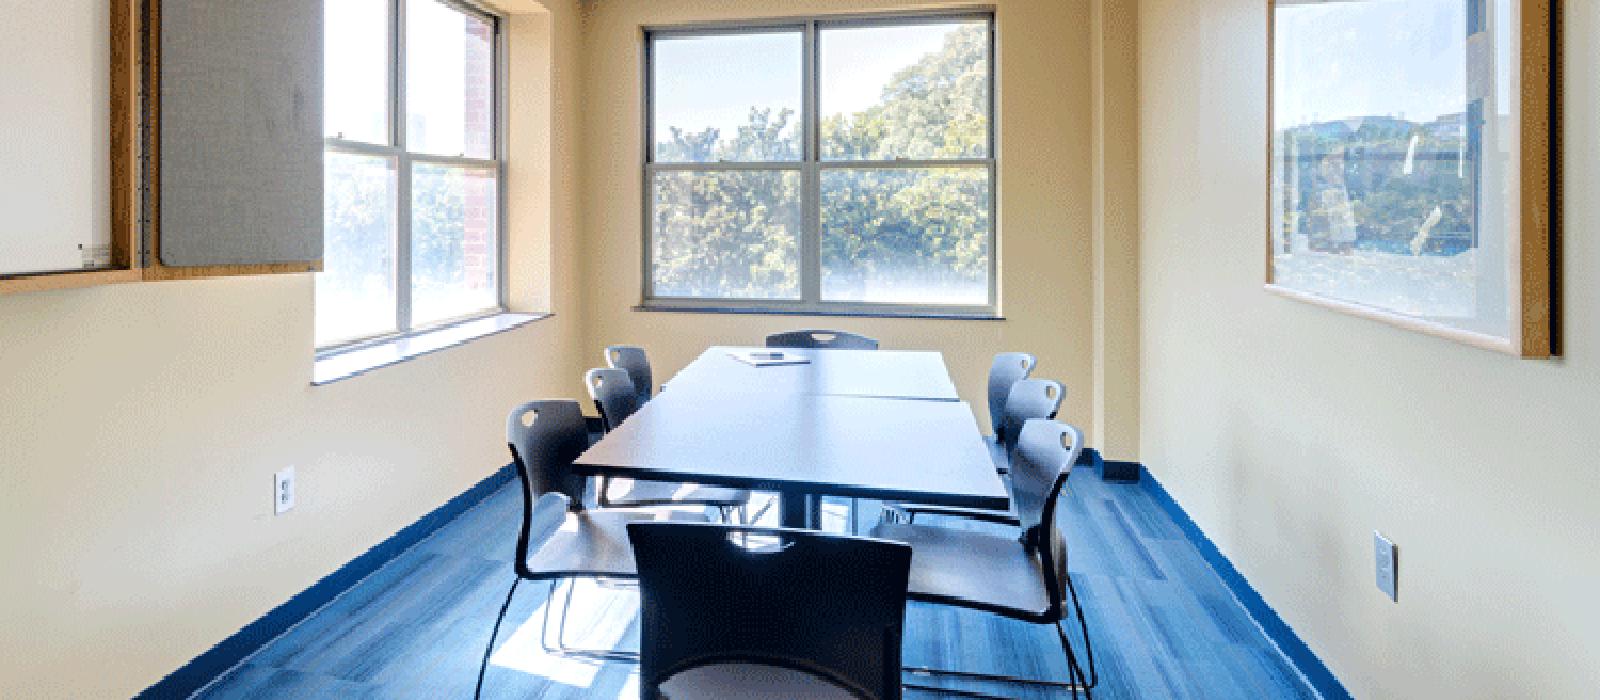 Study room. Long table with chairs. A set of big glass panel windows.